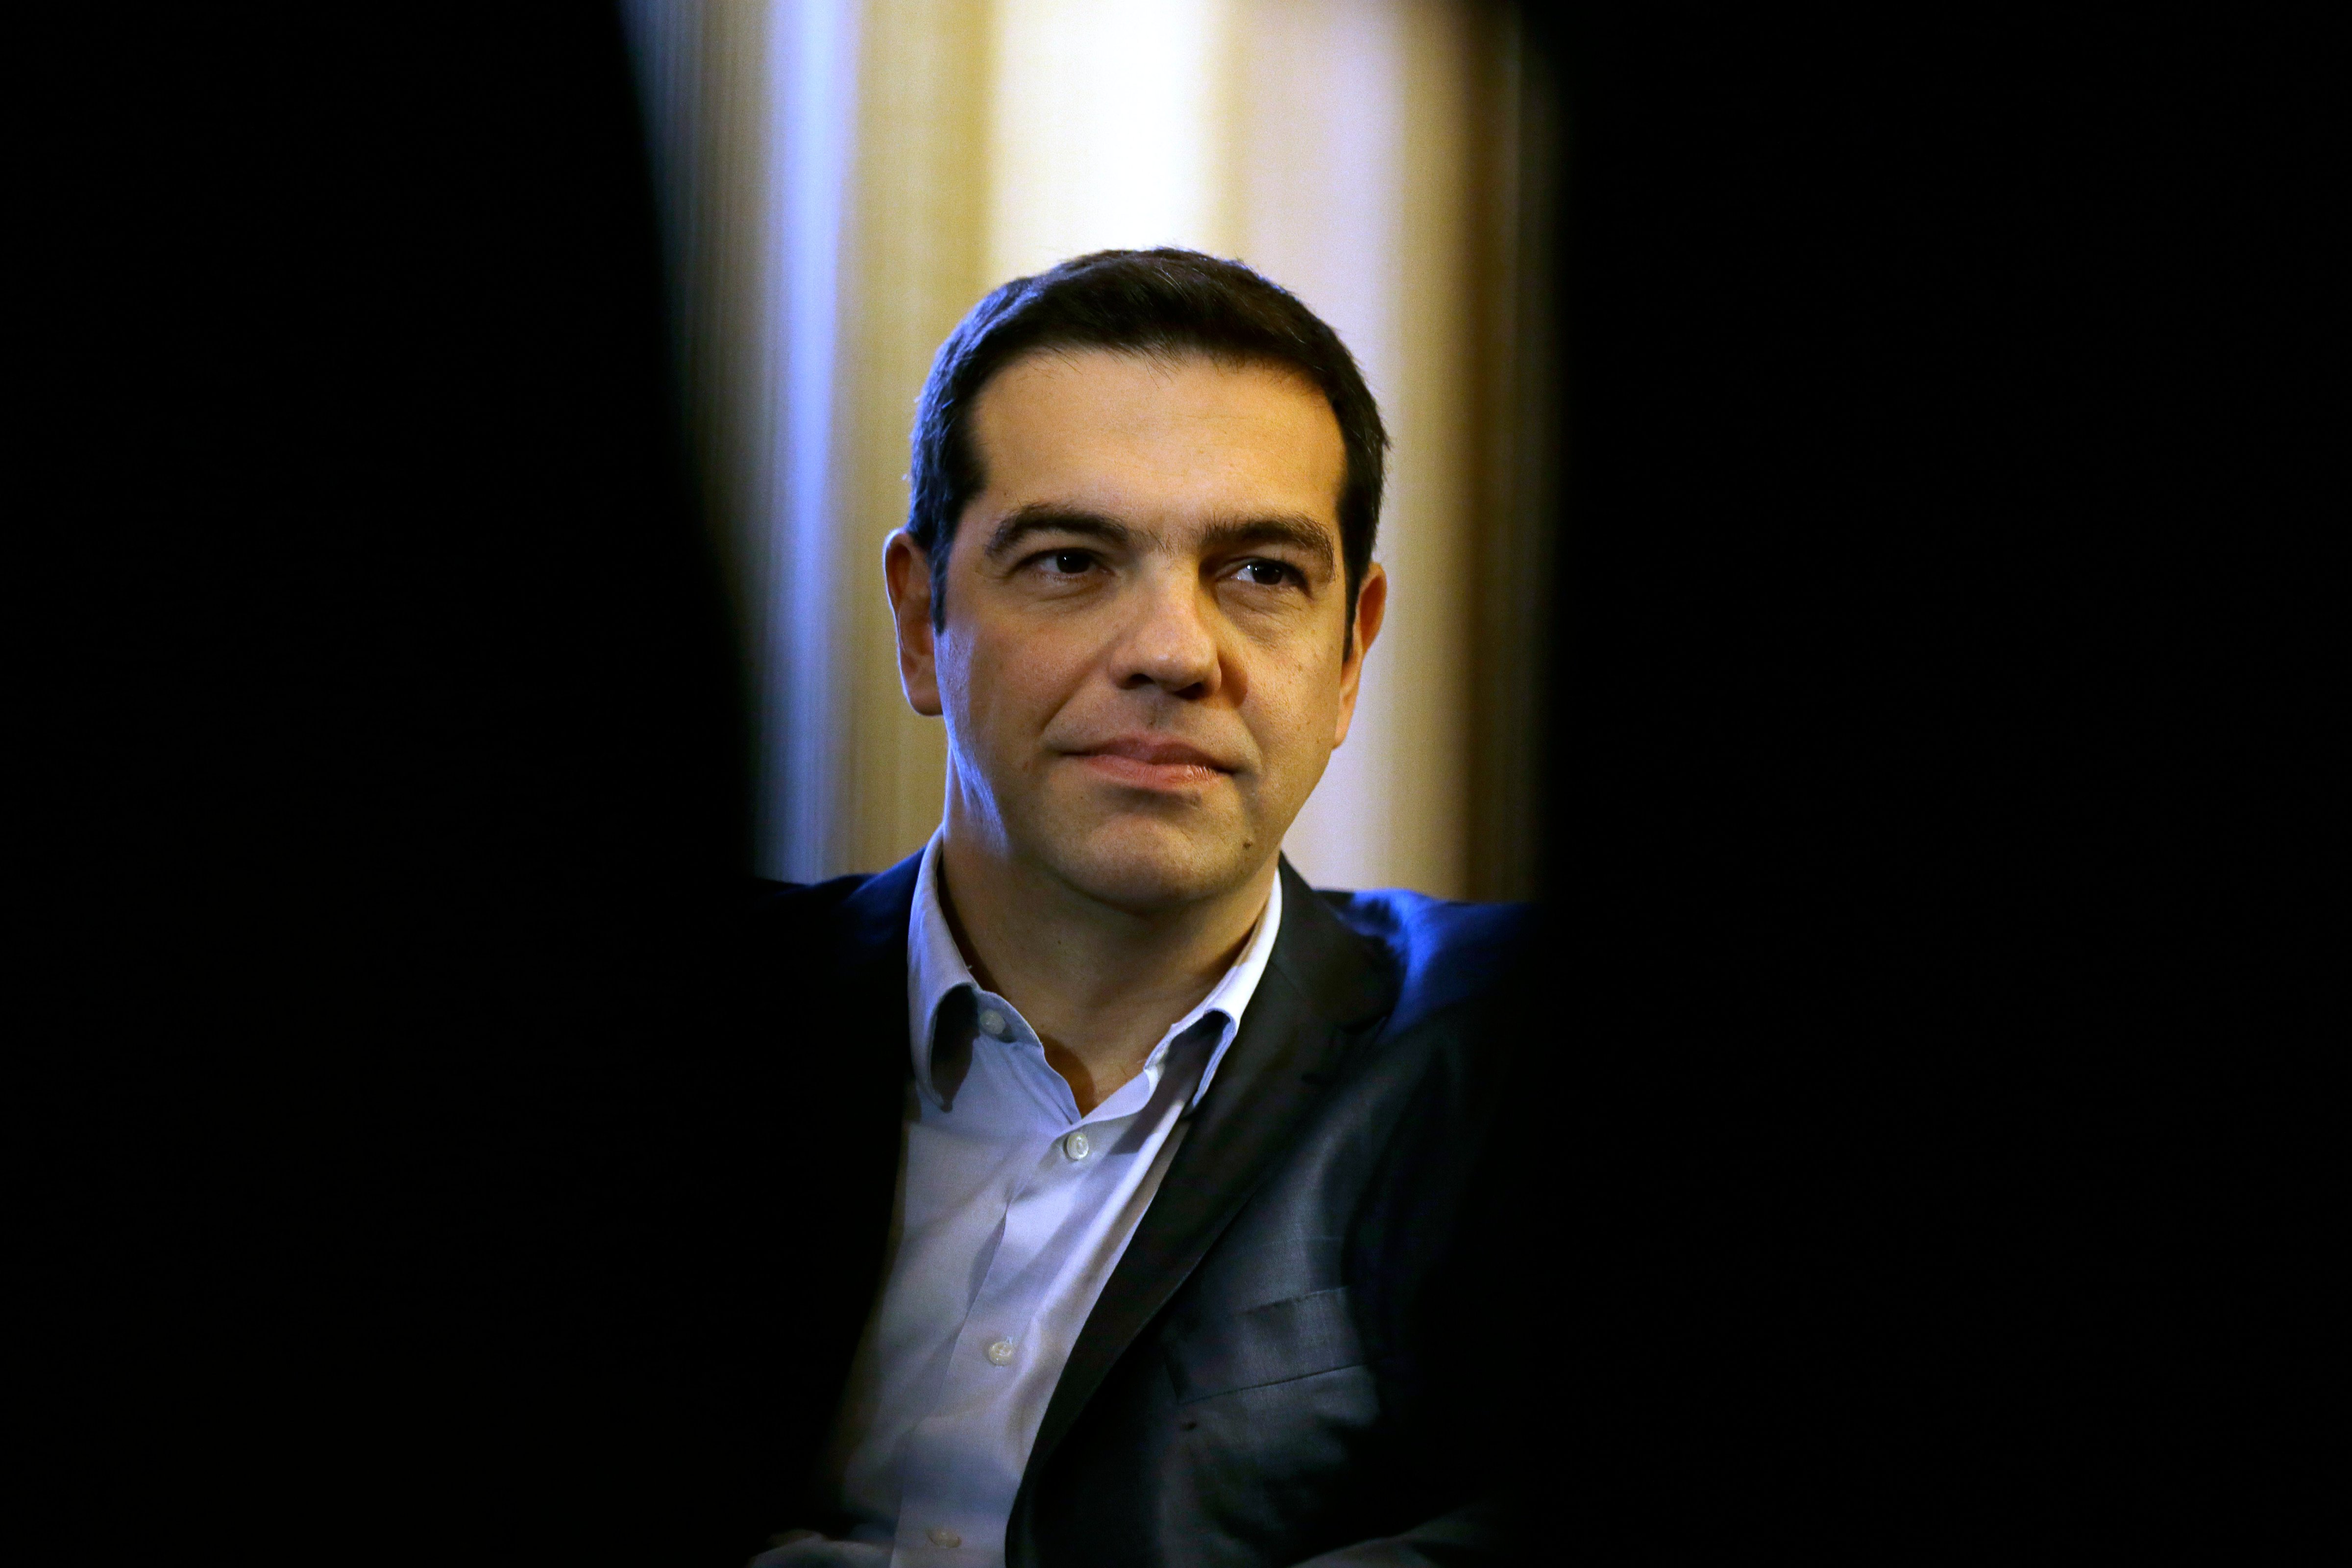 Greece Prime Minister Alexis Tsipras listens to Greek President Karolos Papoulias during their meeting at Presidential Palace in Athens, Greece on Feb. 18, 2015.